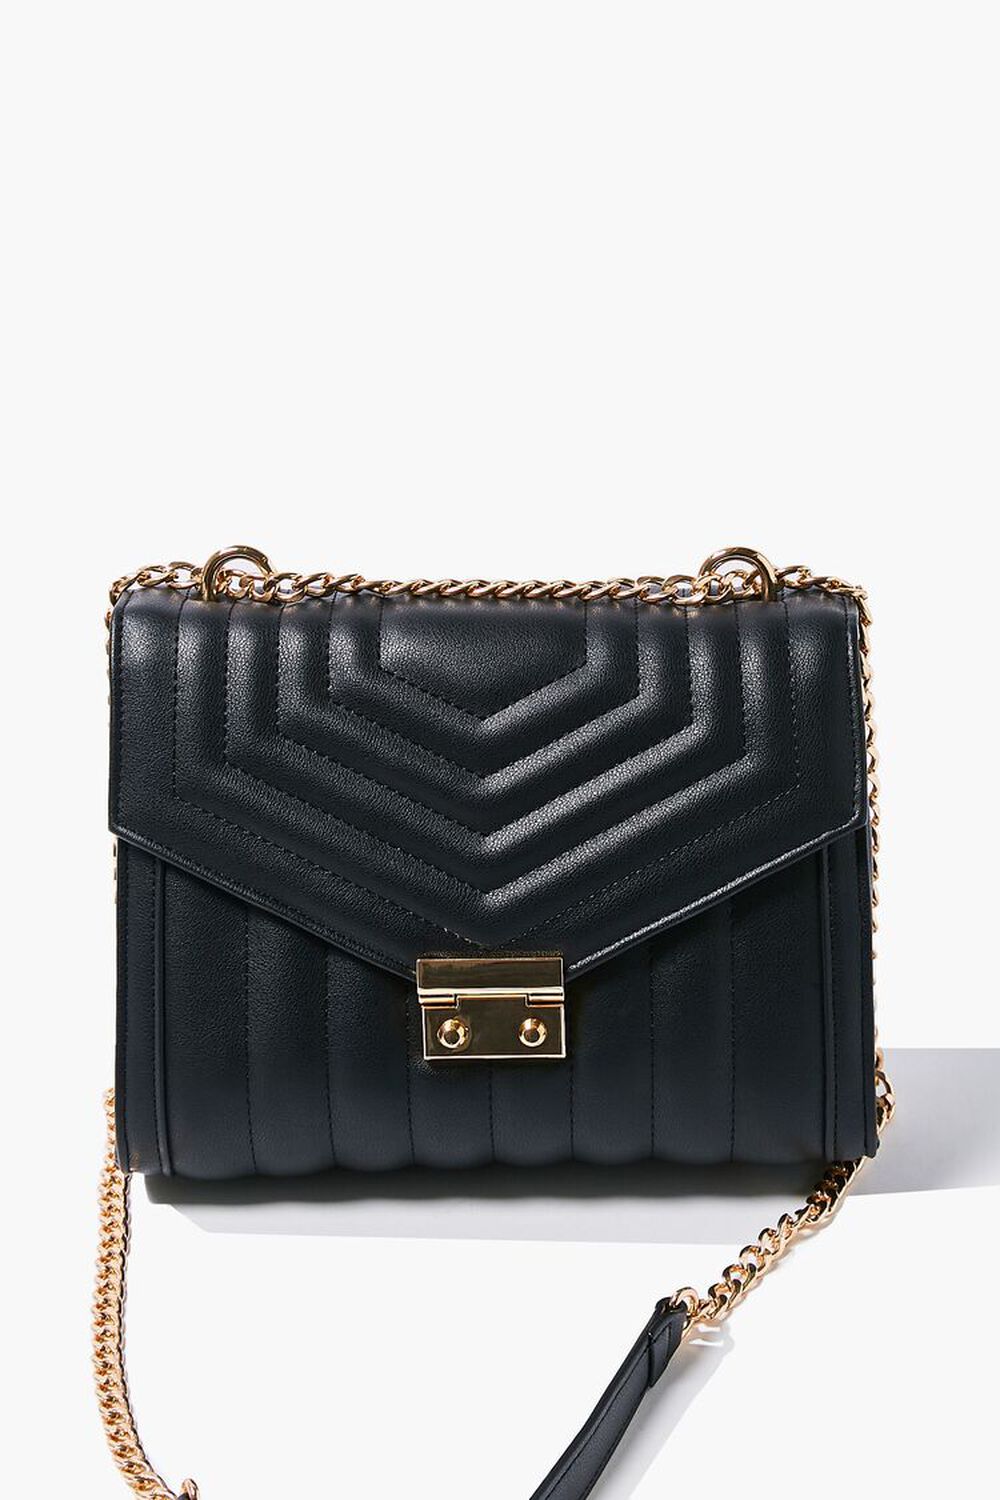 BLACK Quilted Flap-Top Crossbody Bag, image 1